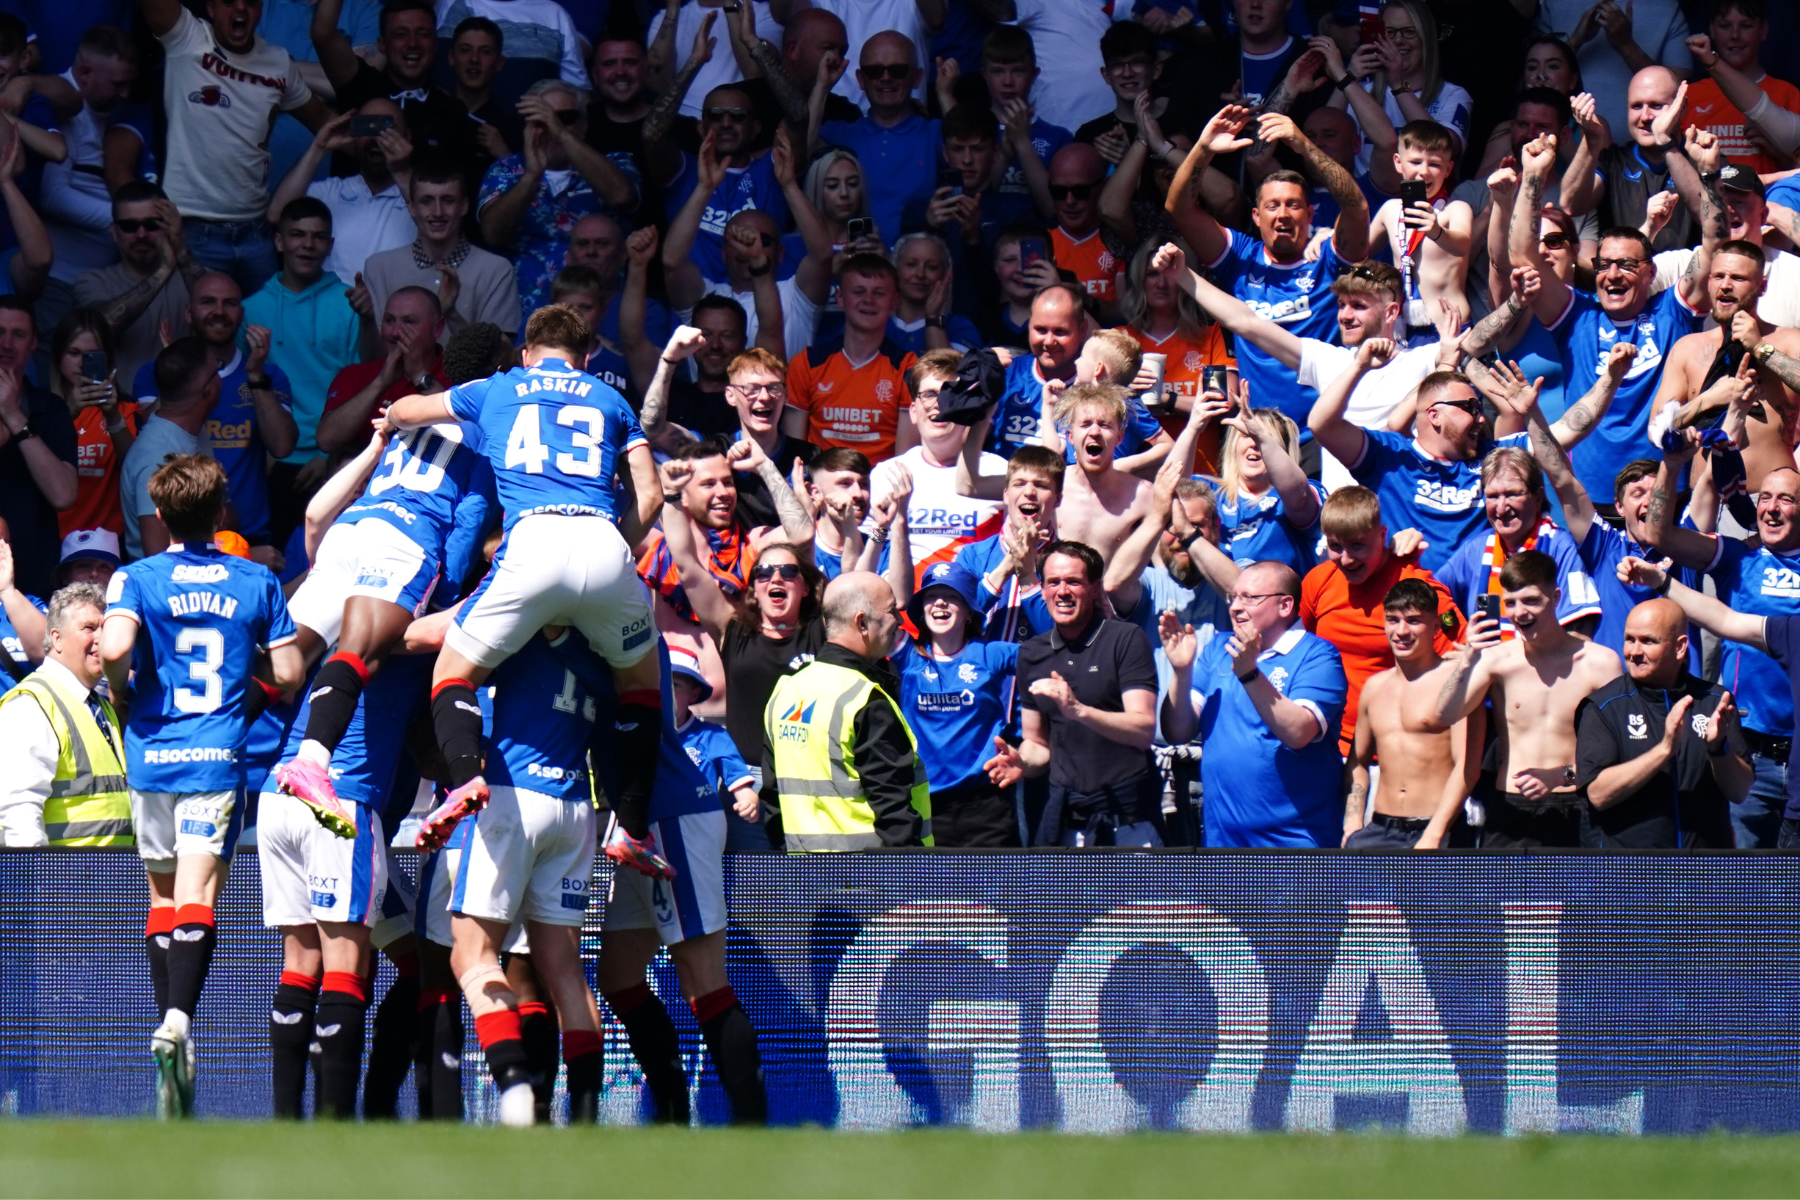 Rangers 3 Celtic 0: Instant reaction as Cantwell pulls Ibrox strings